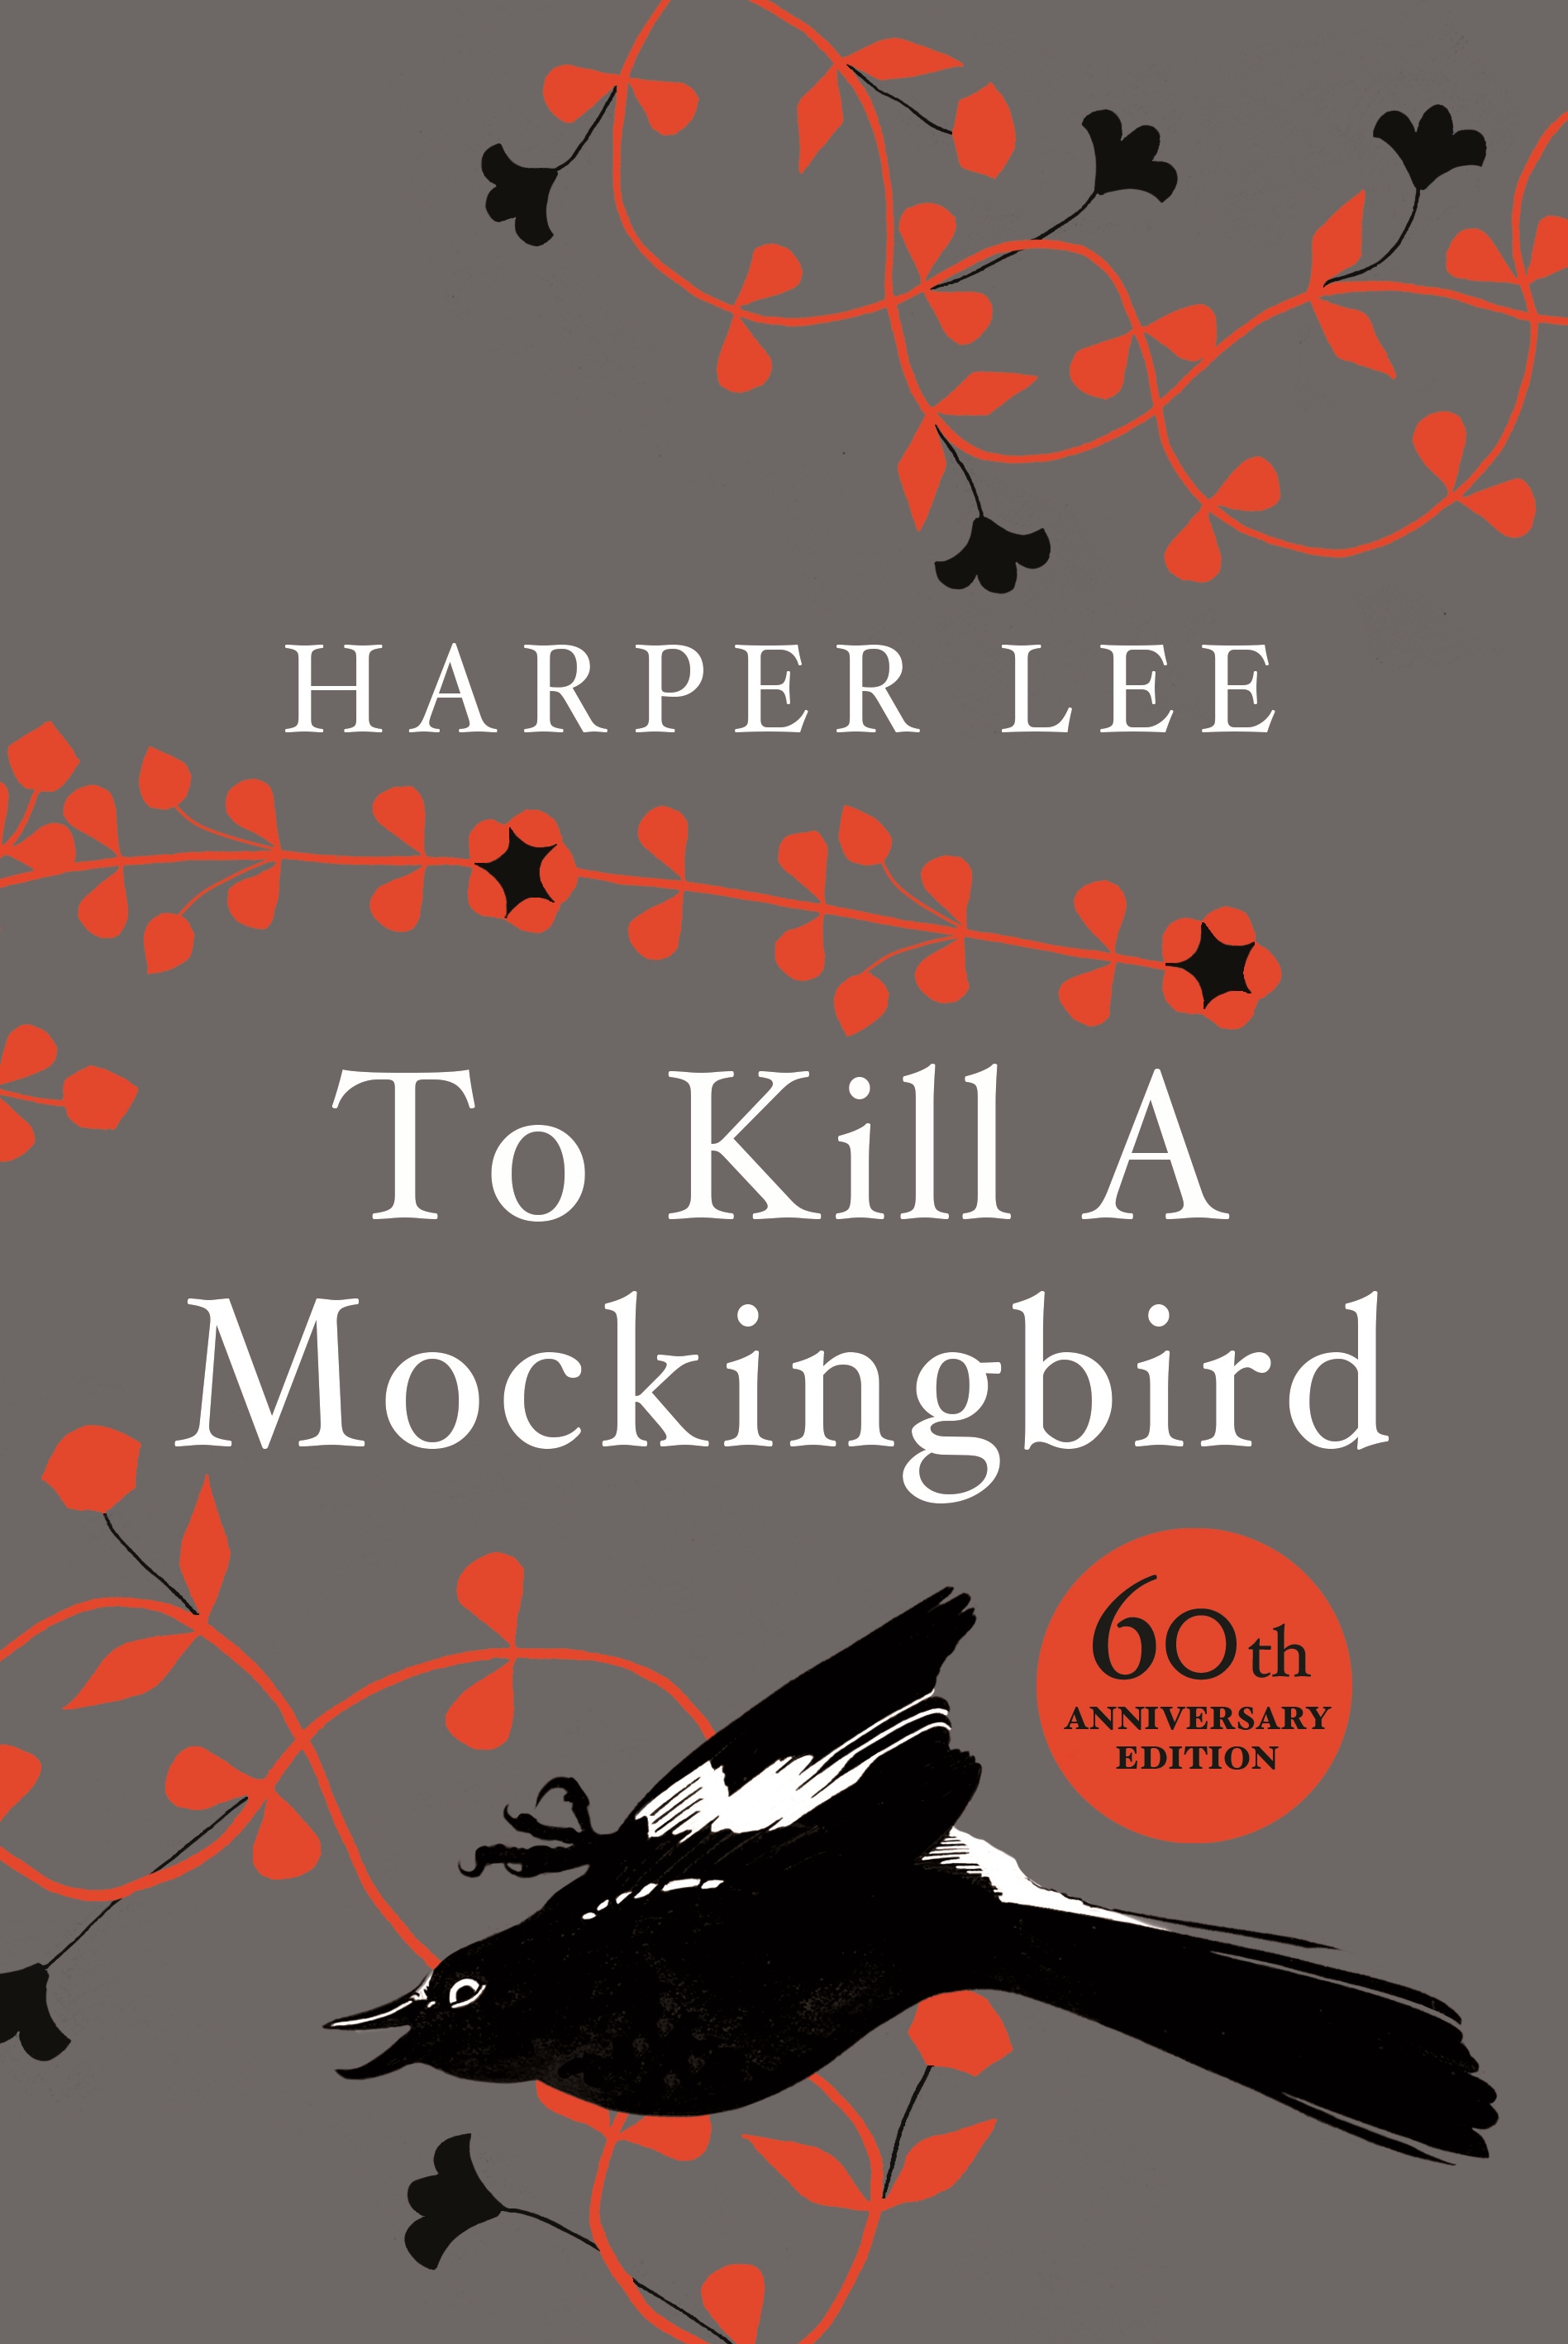 book review on to kill a mockingbird